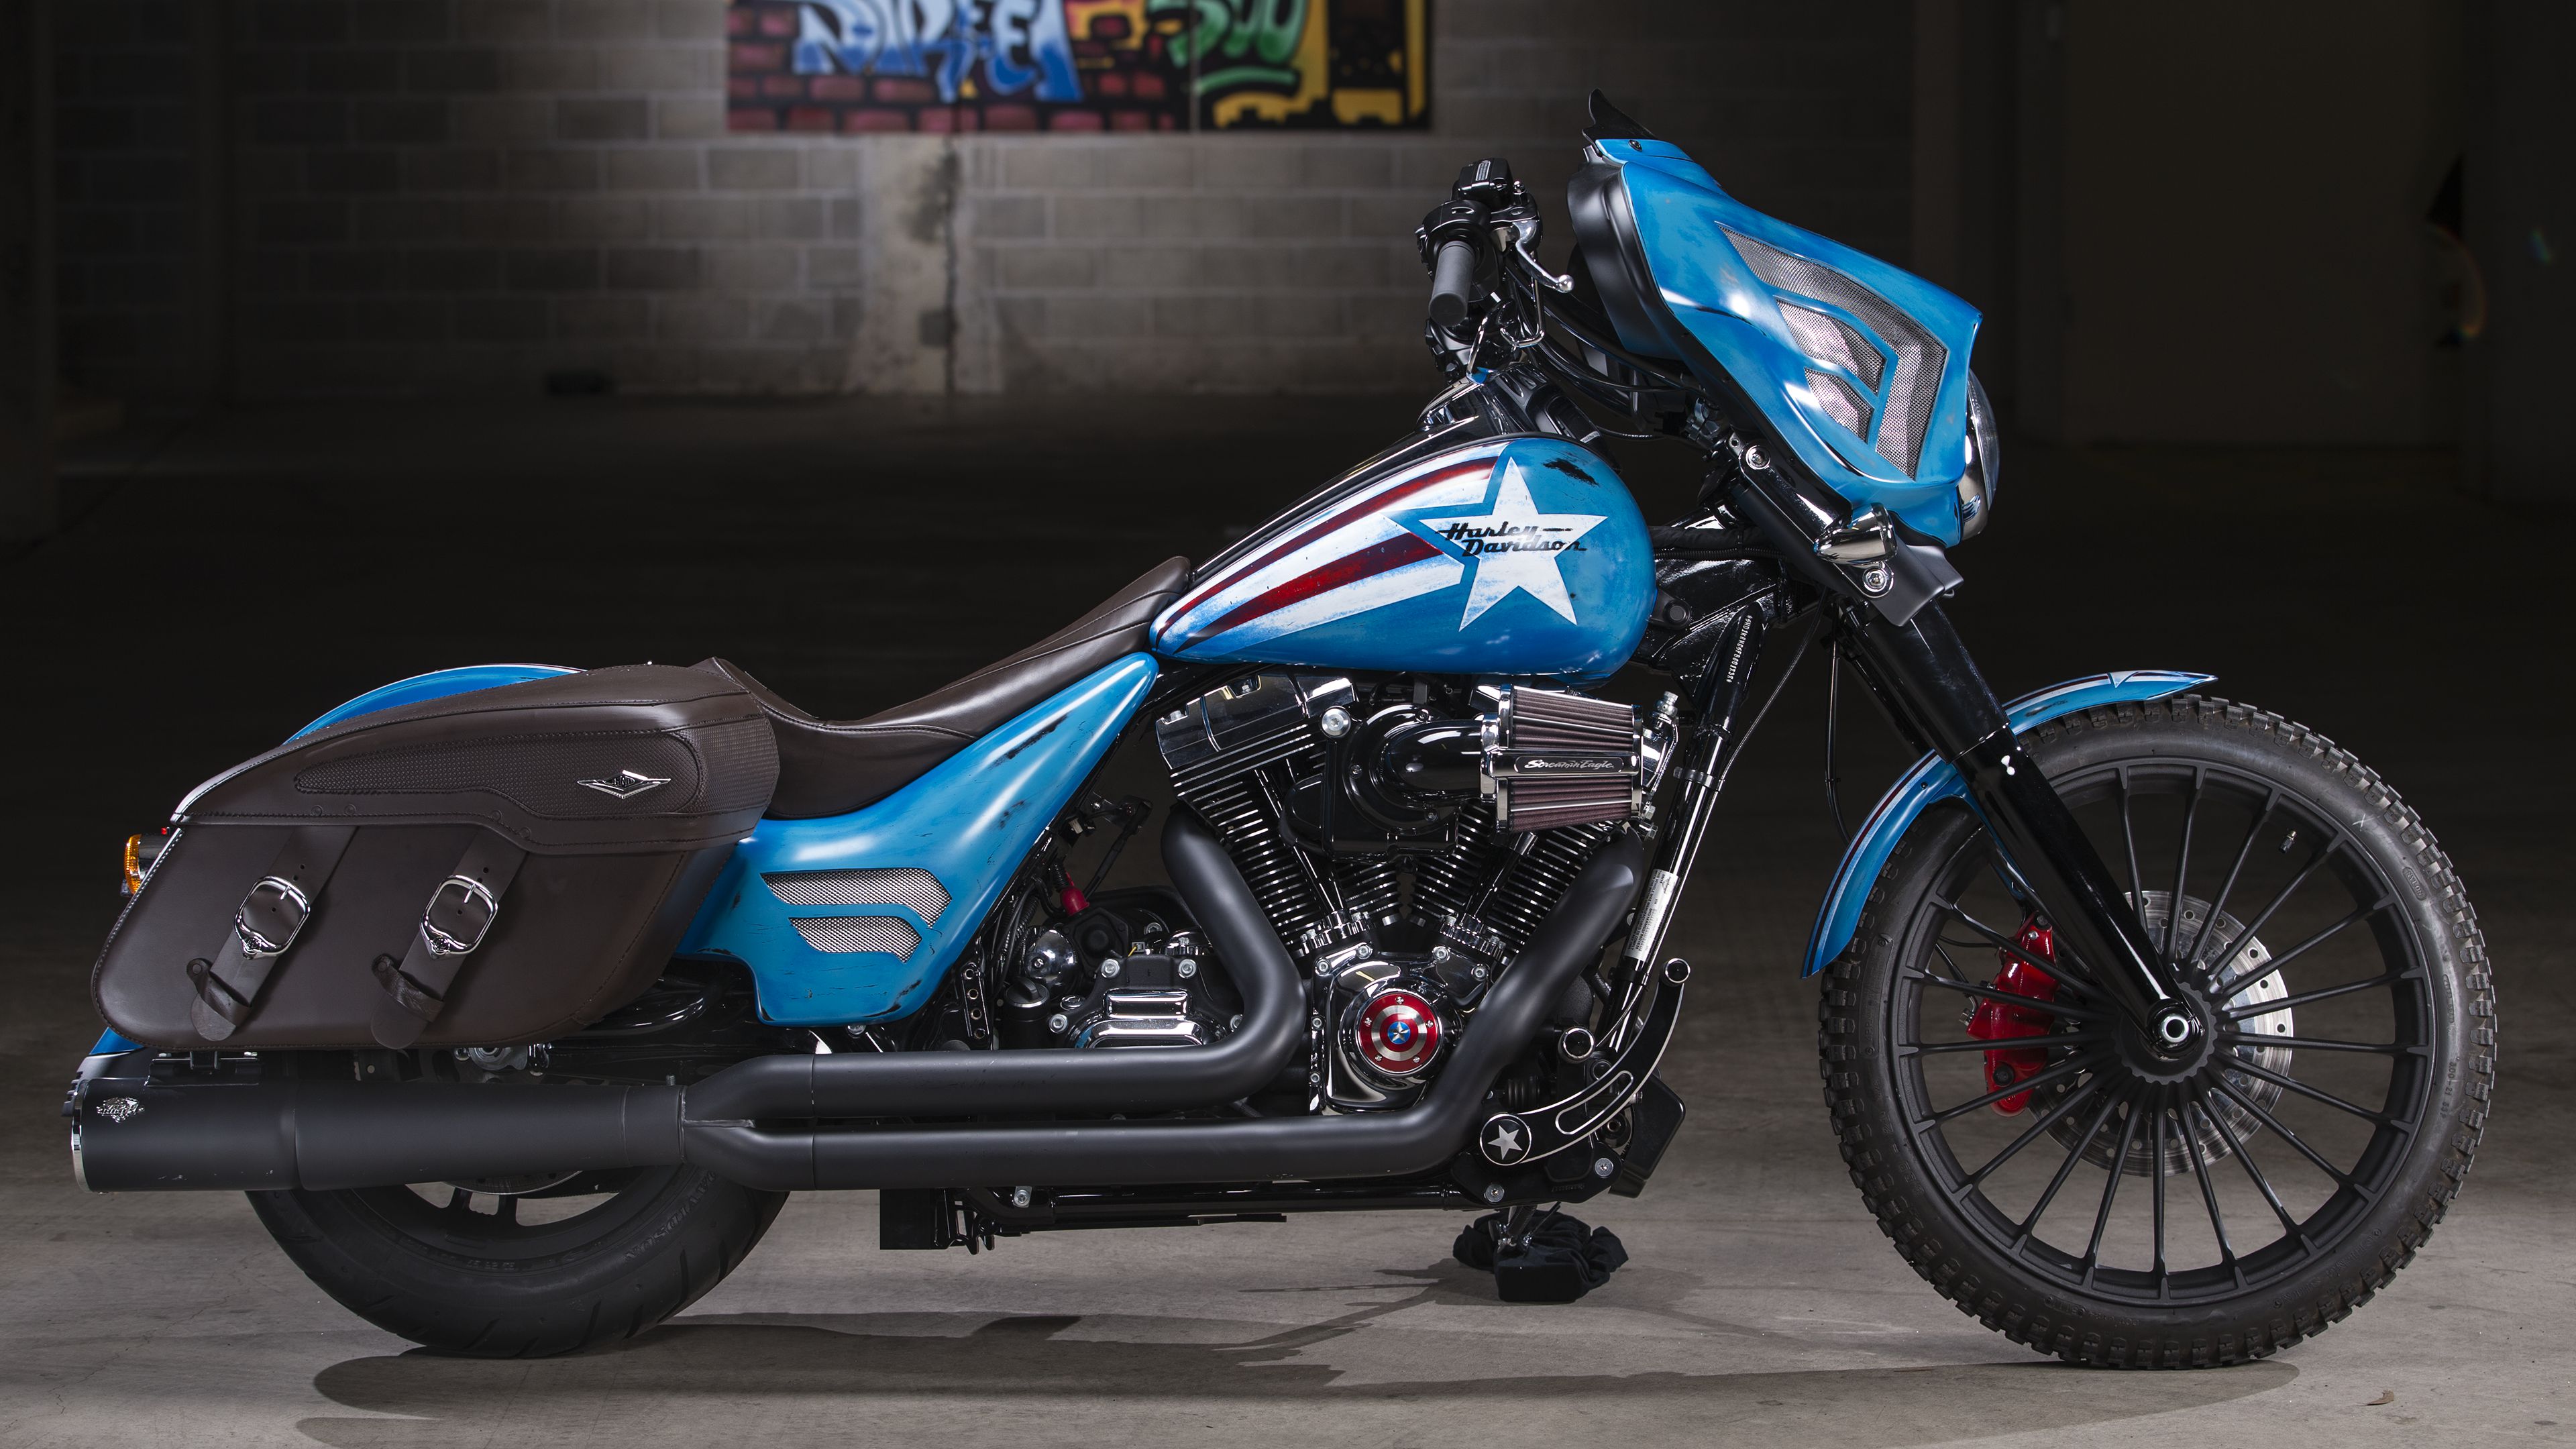 Harley and Marvel customs - for the superhero in you Harley-Davidson Captai...